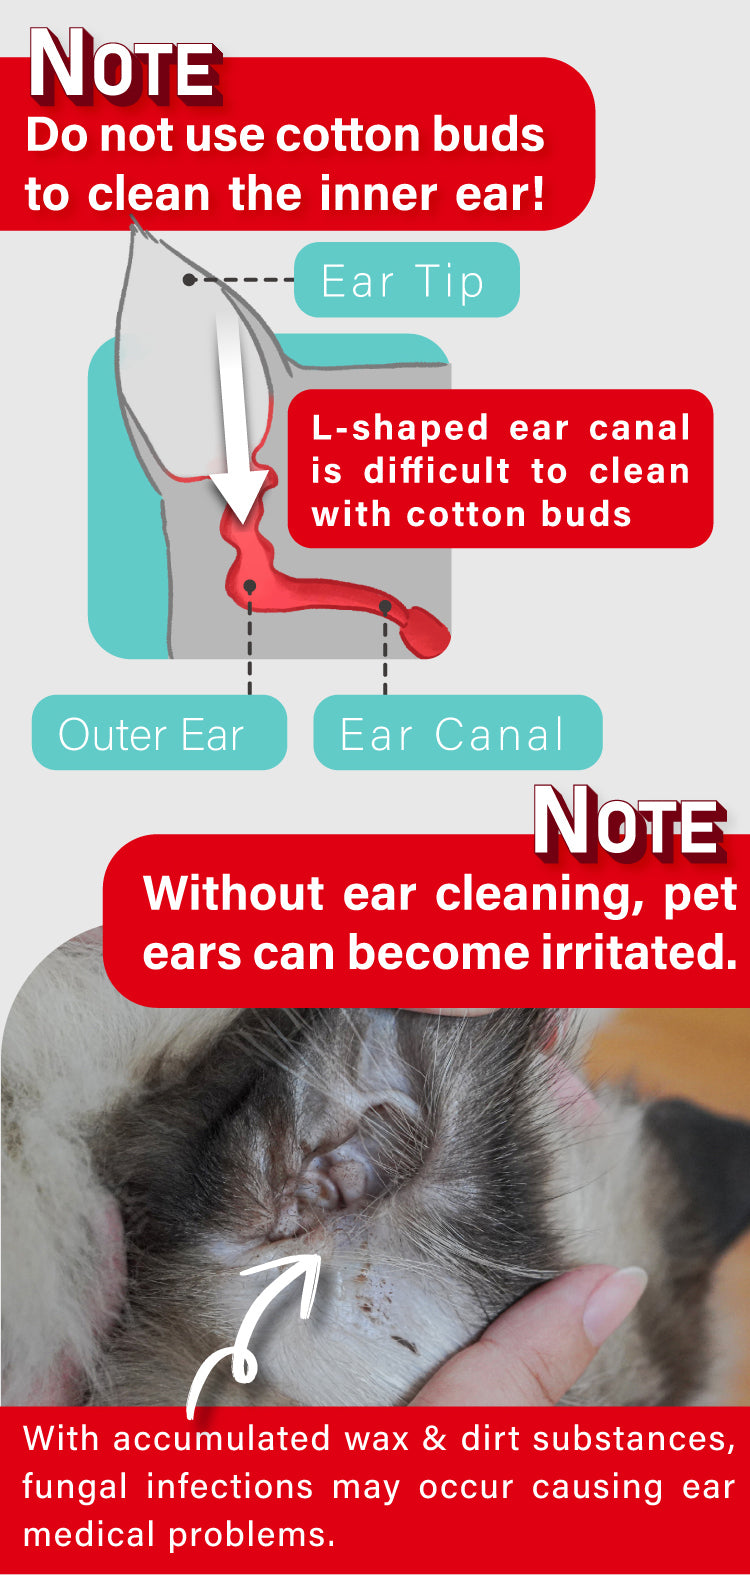 ODOUT Ear Cleansing Solution 200ml Dog Cat Pet Gro